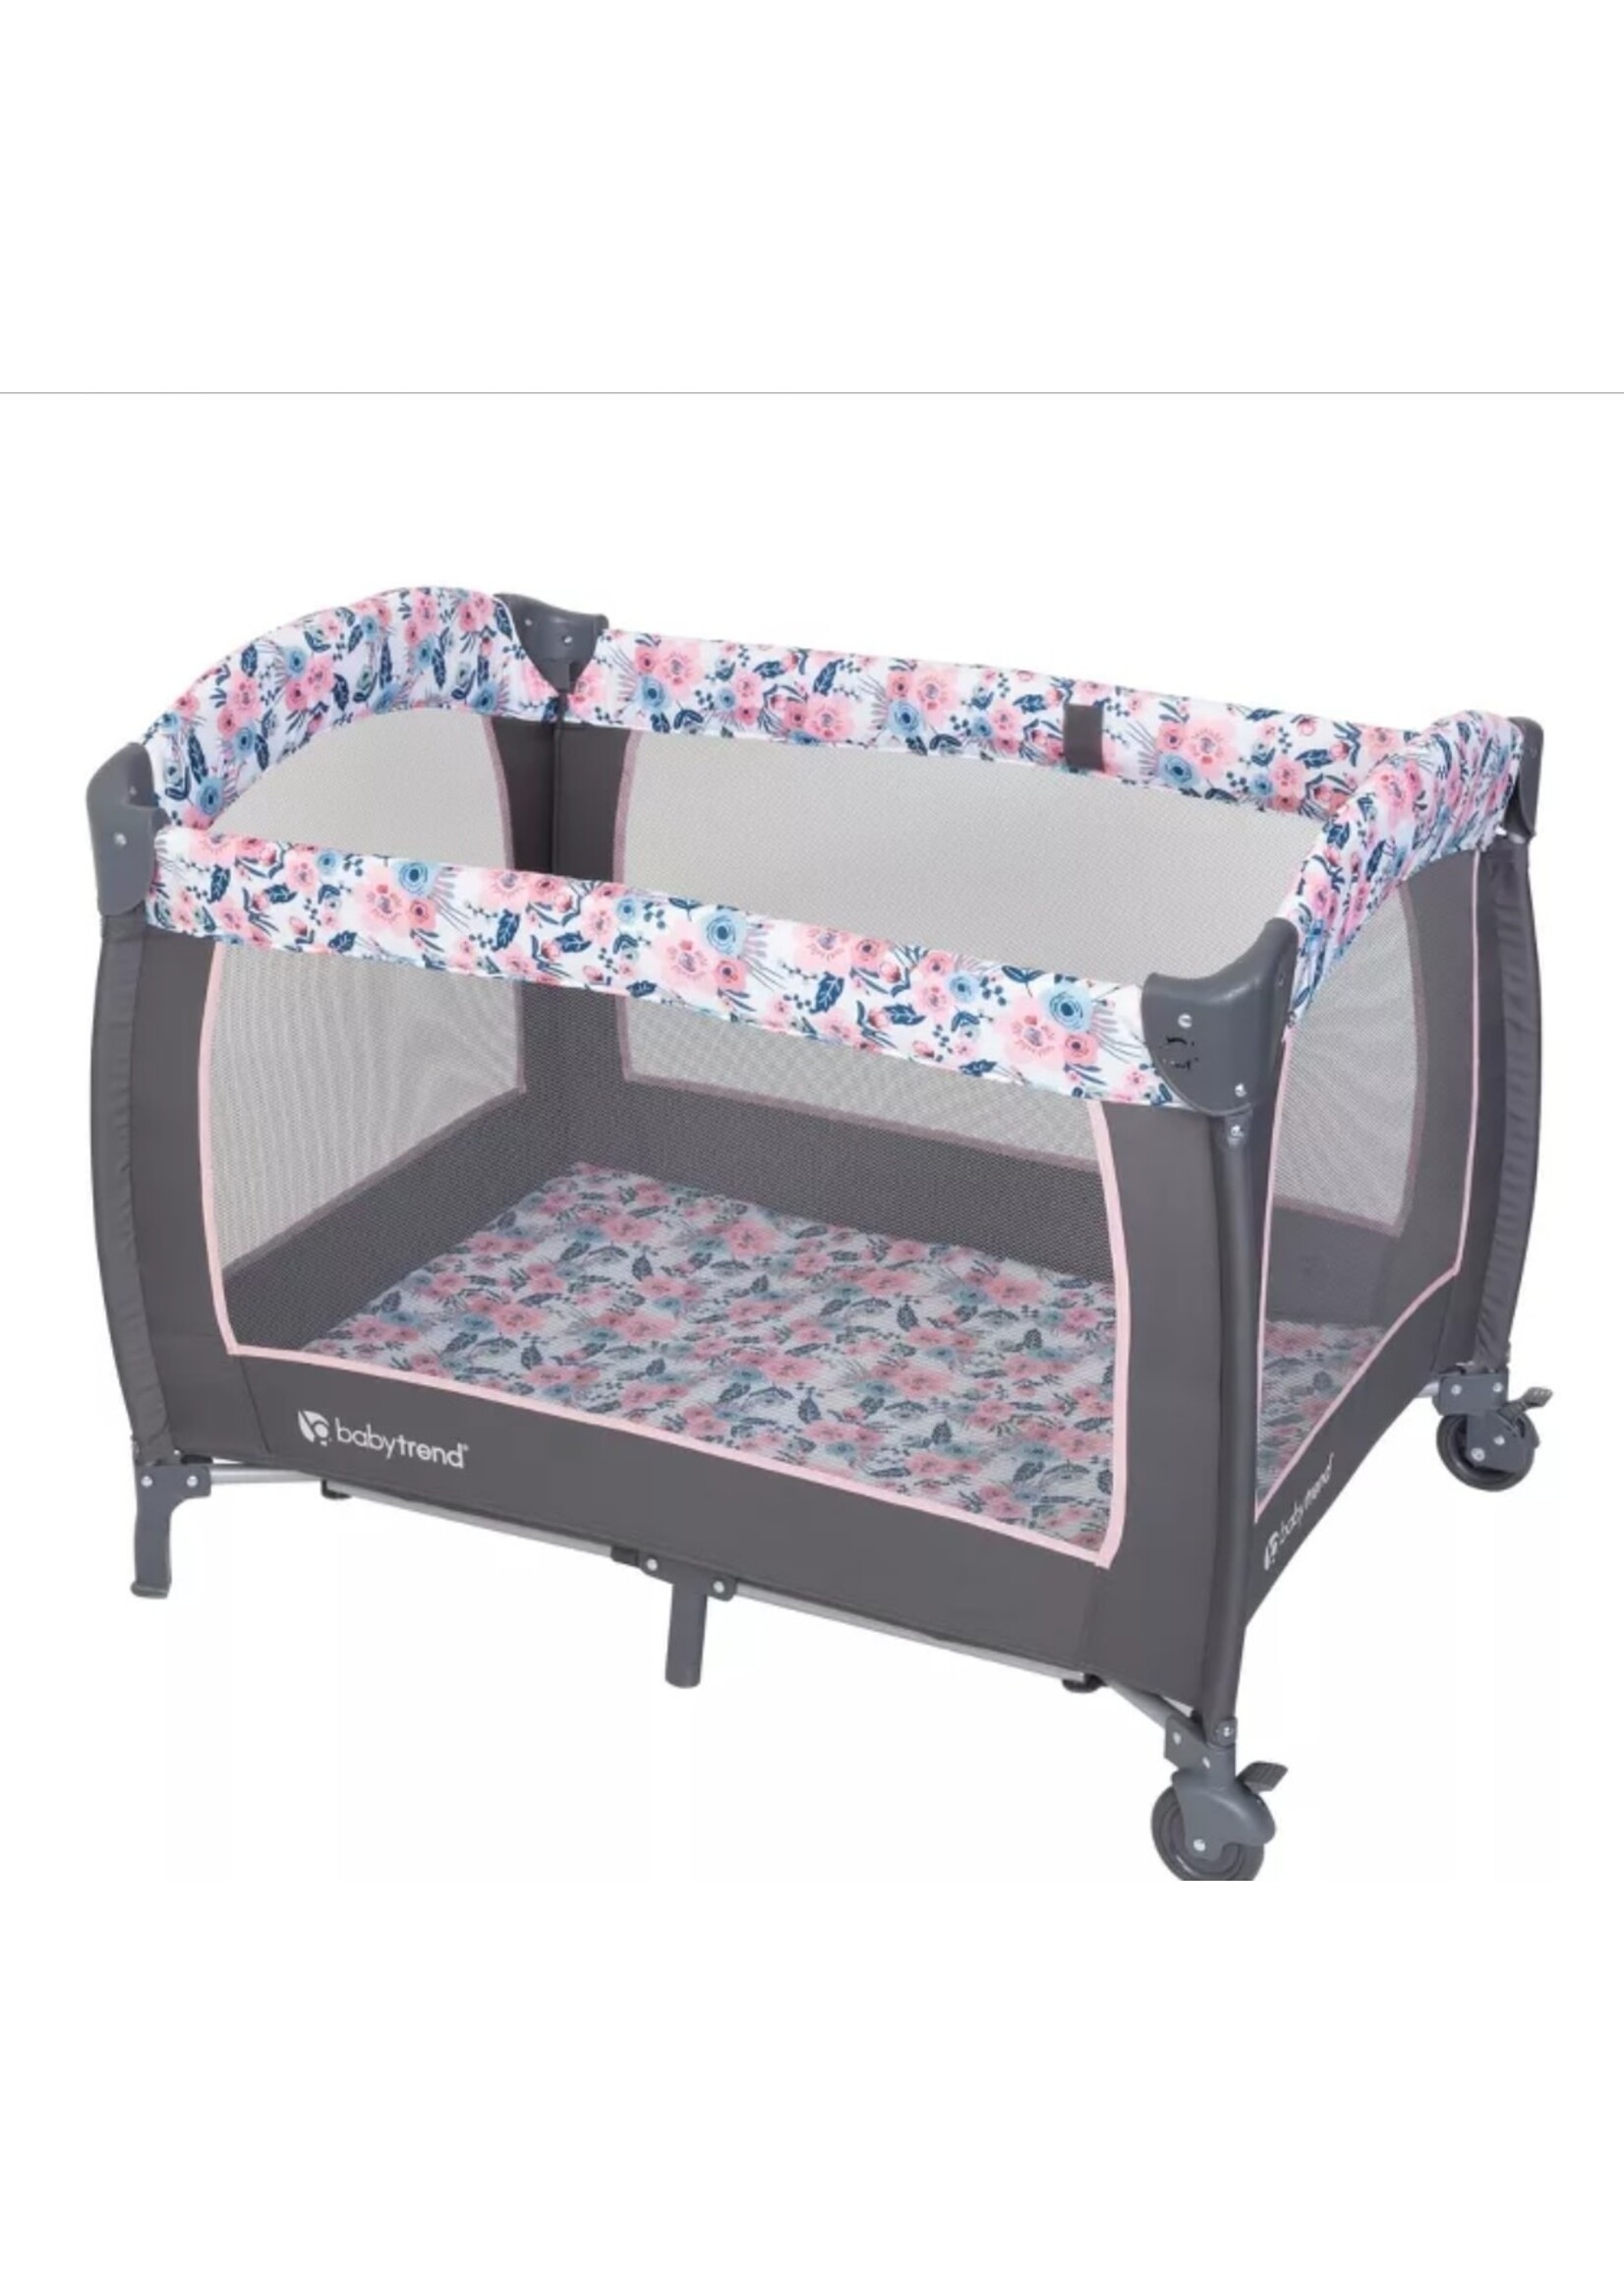 Baby Trend Lil Snooze Deluxe II Nursery Center - Bluebell